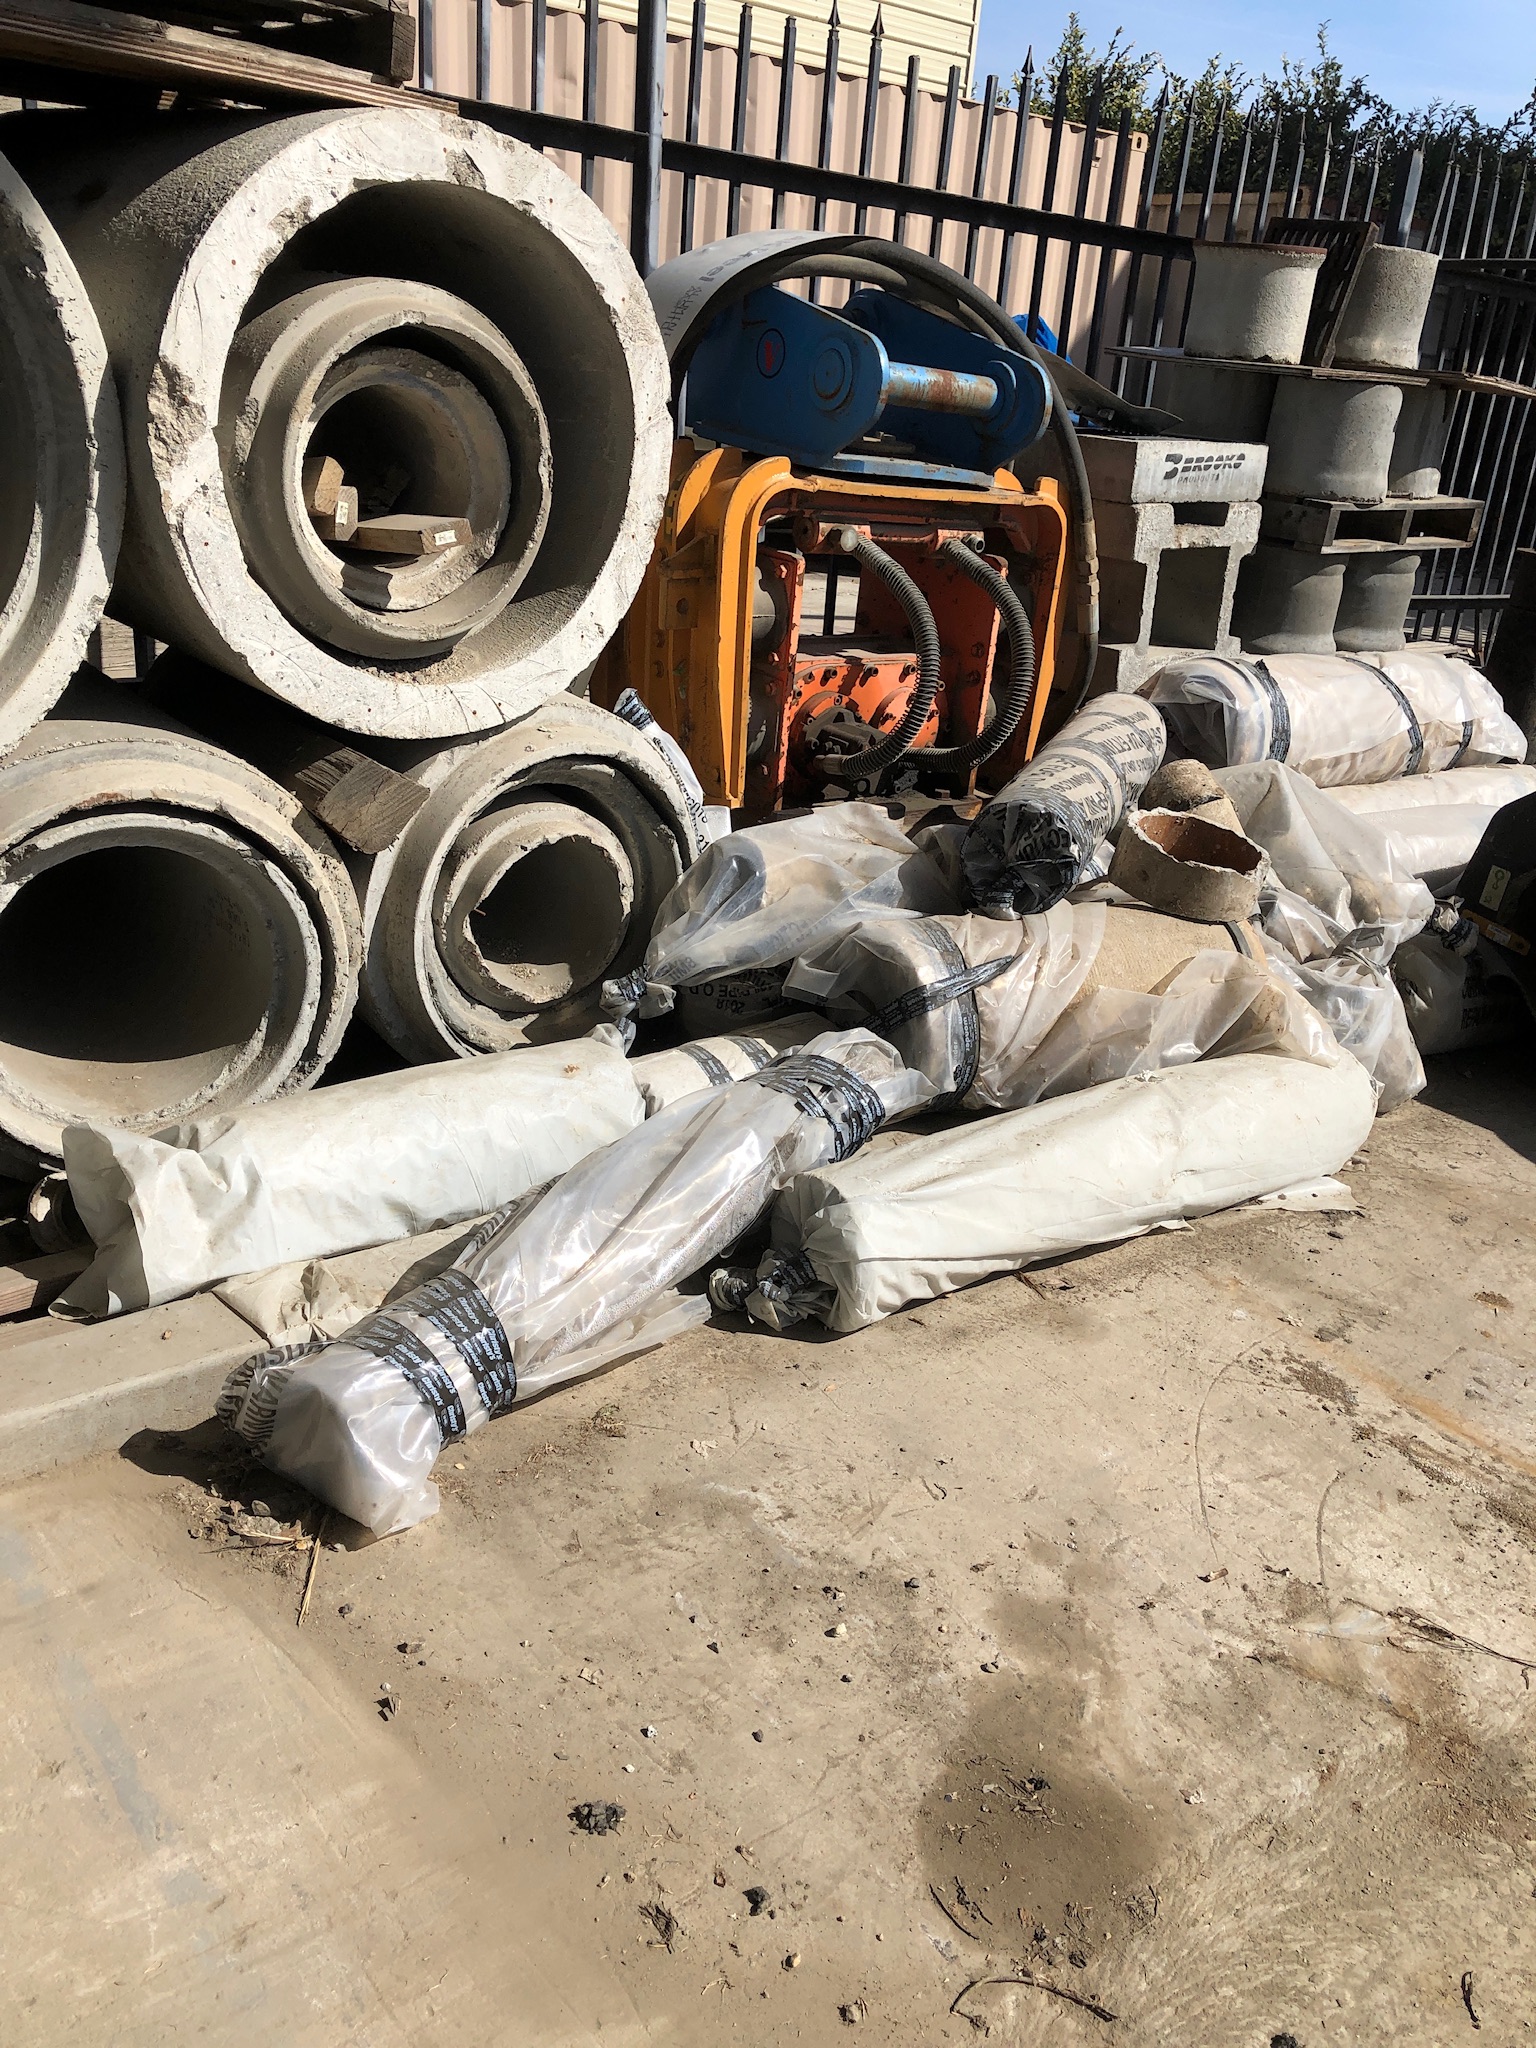 Improper disposal of asbestos pipe, we moved in and with help of remediation company secured and cleaned the area disposing of pipe in legal landfill , 